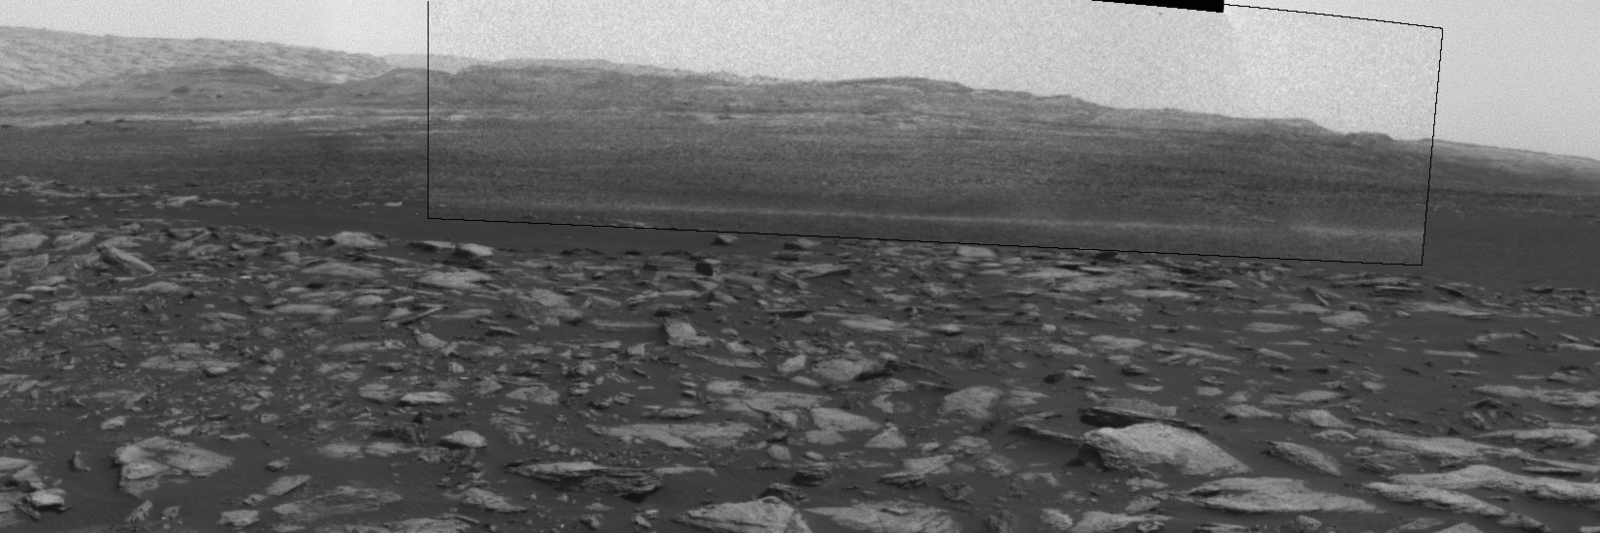 Martian Dust Devil Action in Gale Crater, Sol 1597